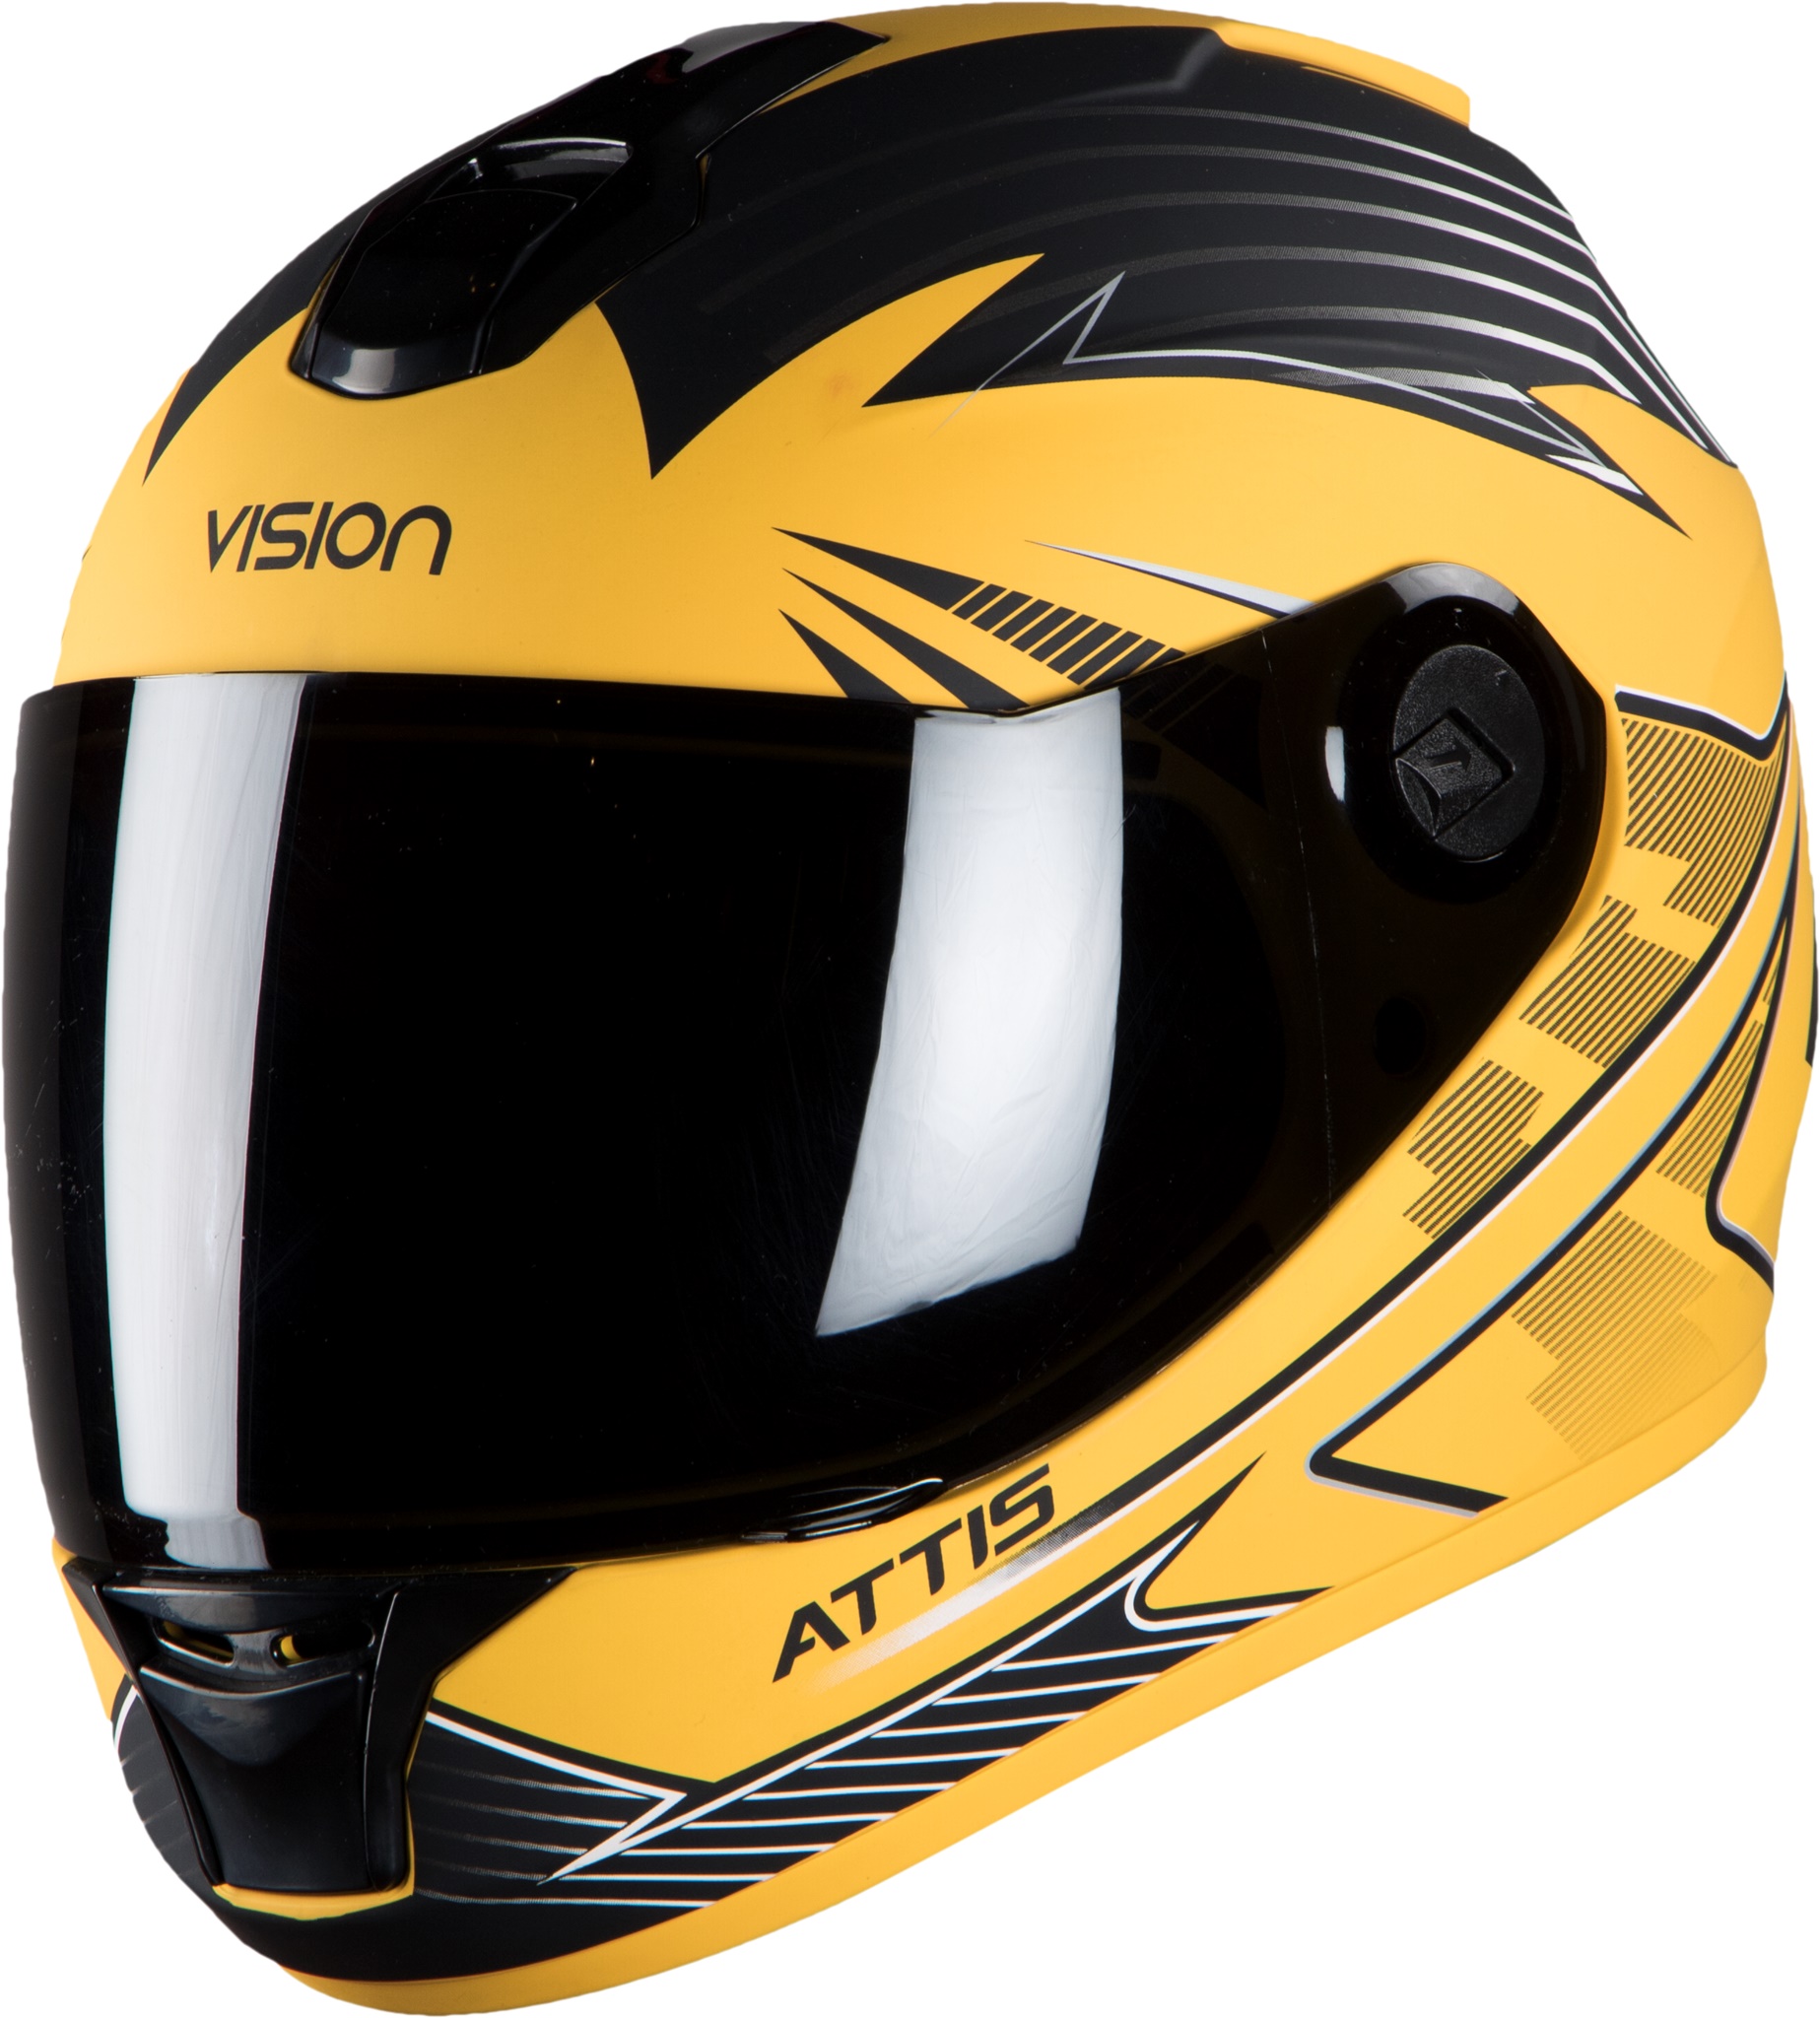 Steelbird HI-GN Men Vision Decal Attis Glossy Yellow/ Black ( Fitted With Clear Visor Extra Smoke Visor Free)